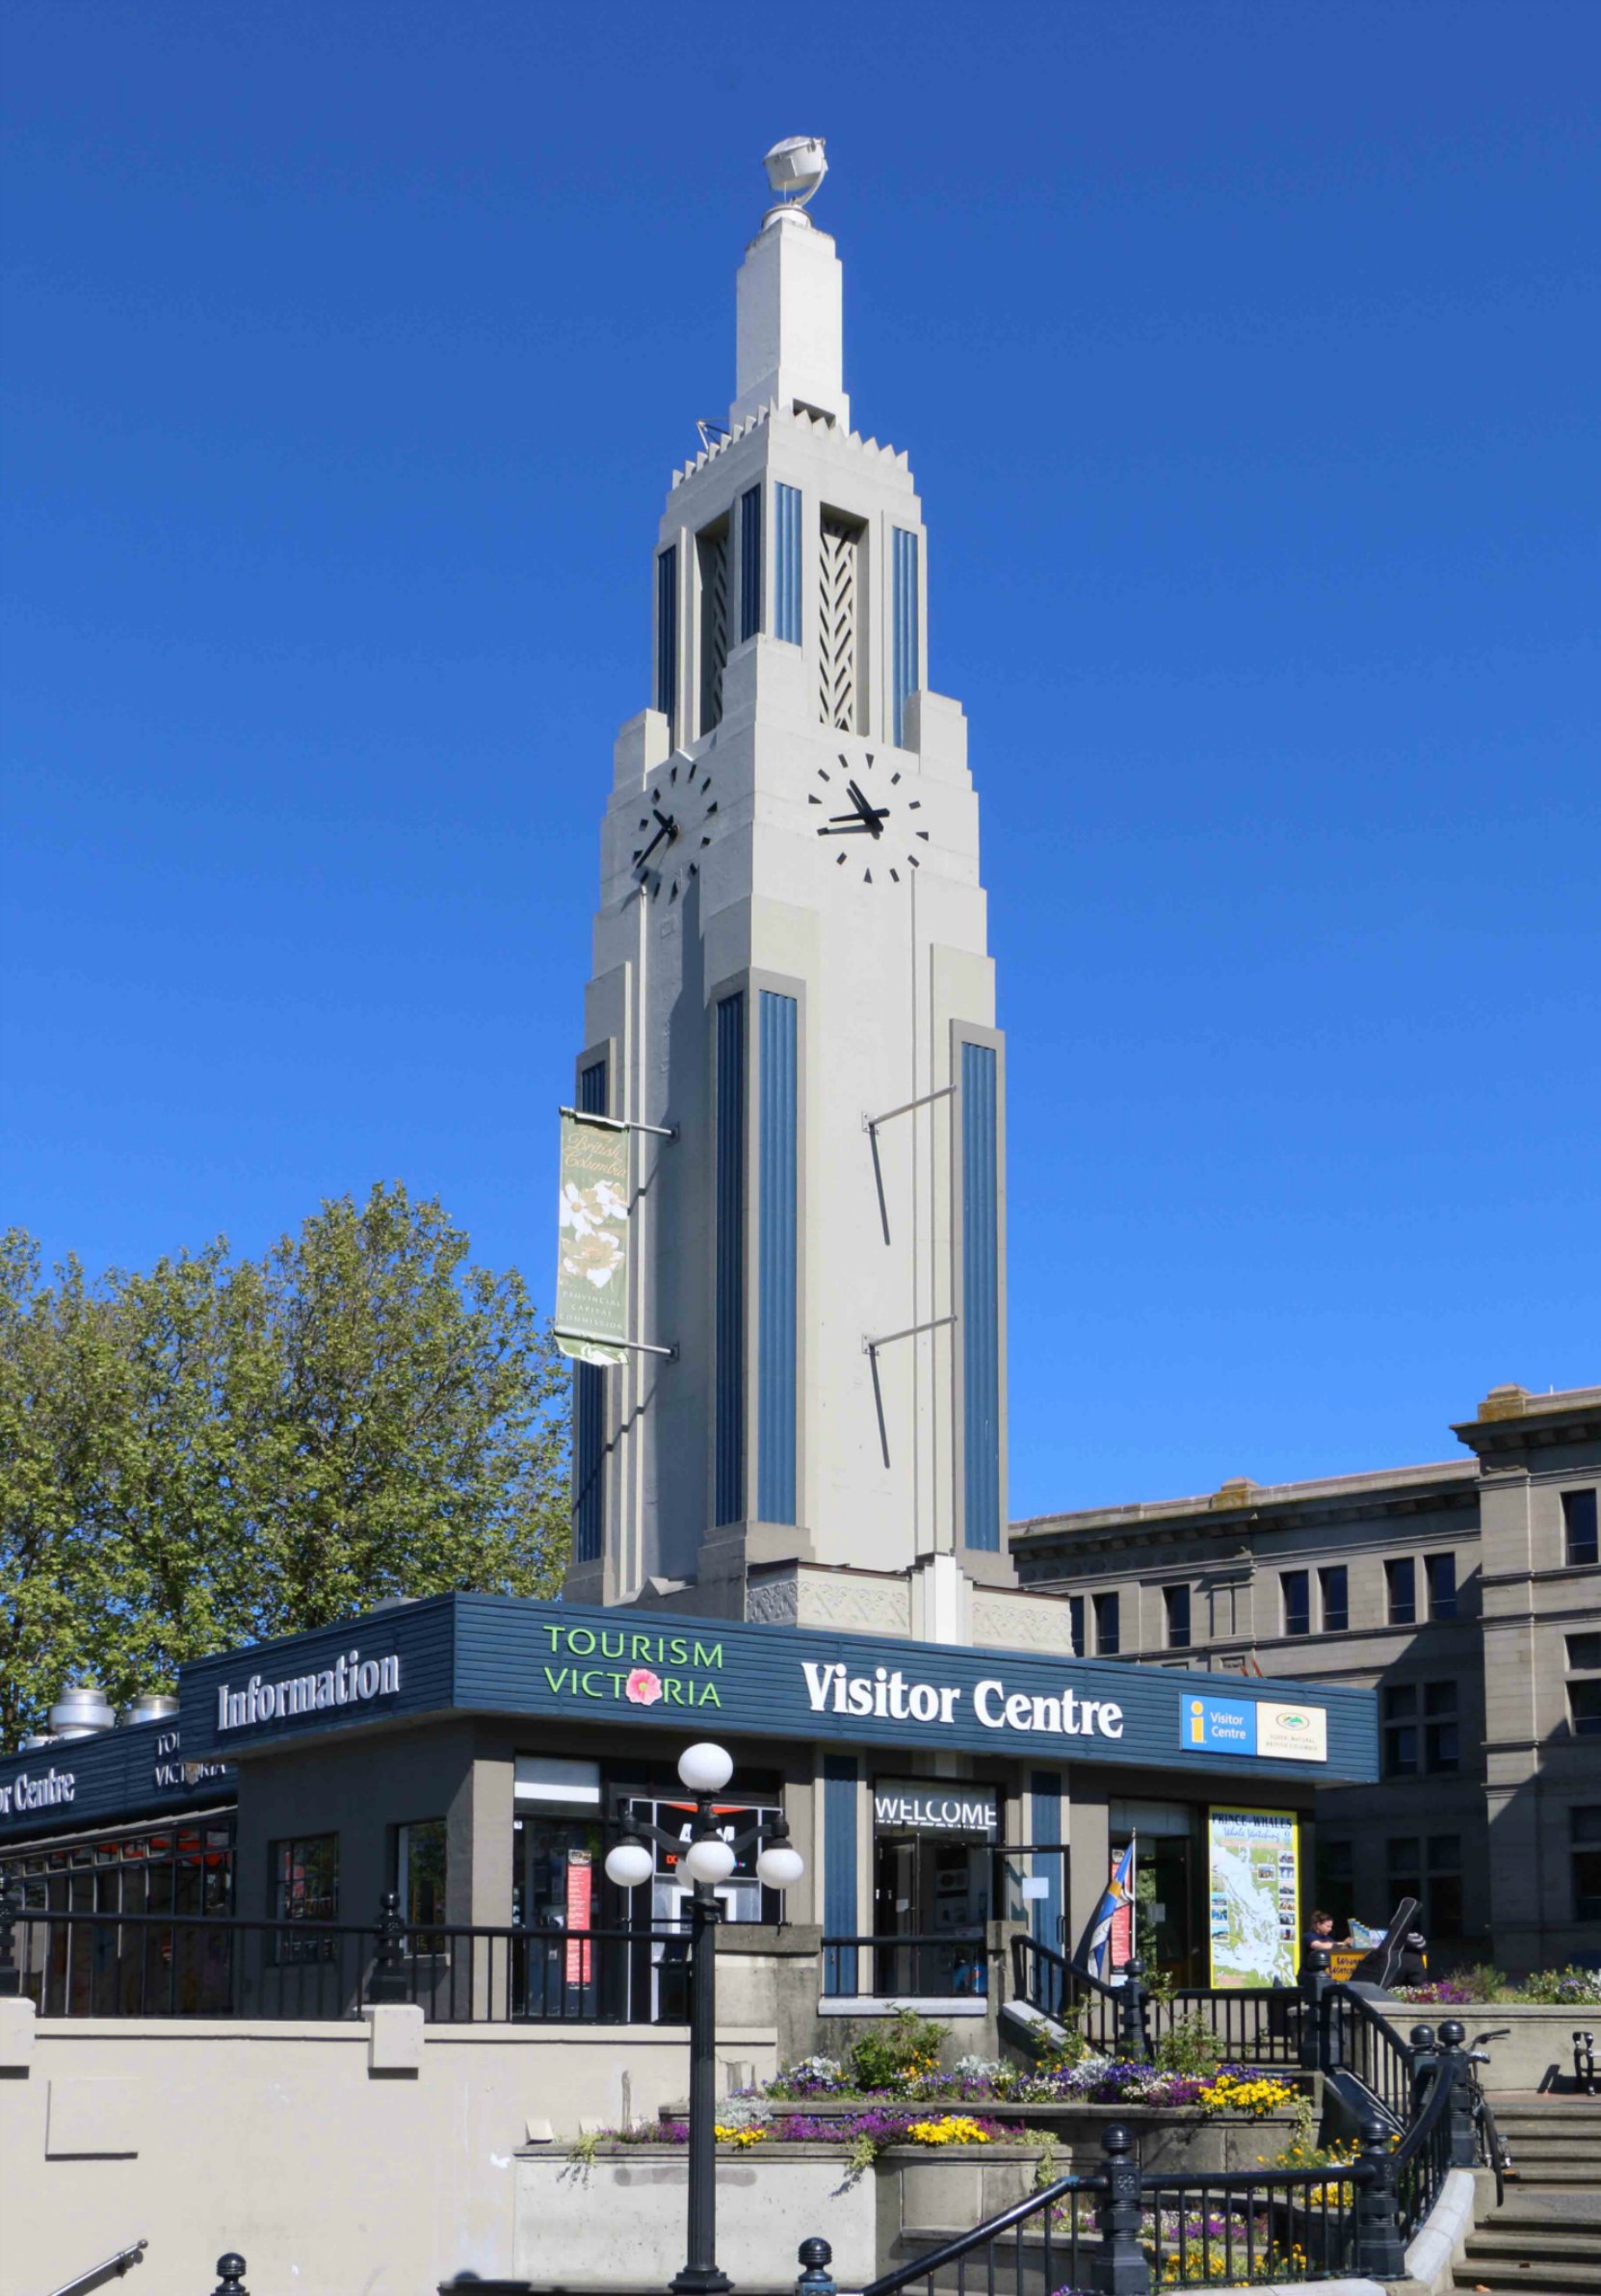 The Tourism Victoria Visitor Centre, 812 Wharf Street. This Art Deco building was originally built in 1931 by Imperial Oil as a service station. The tower still features a Sperry searchlight intended as a navigation beacon for aircraft.